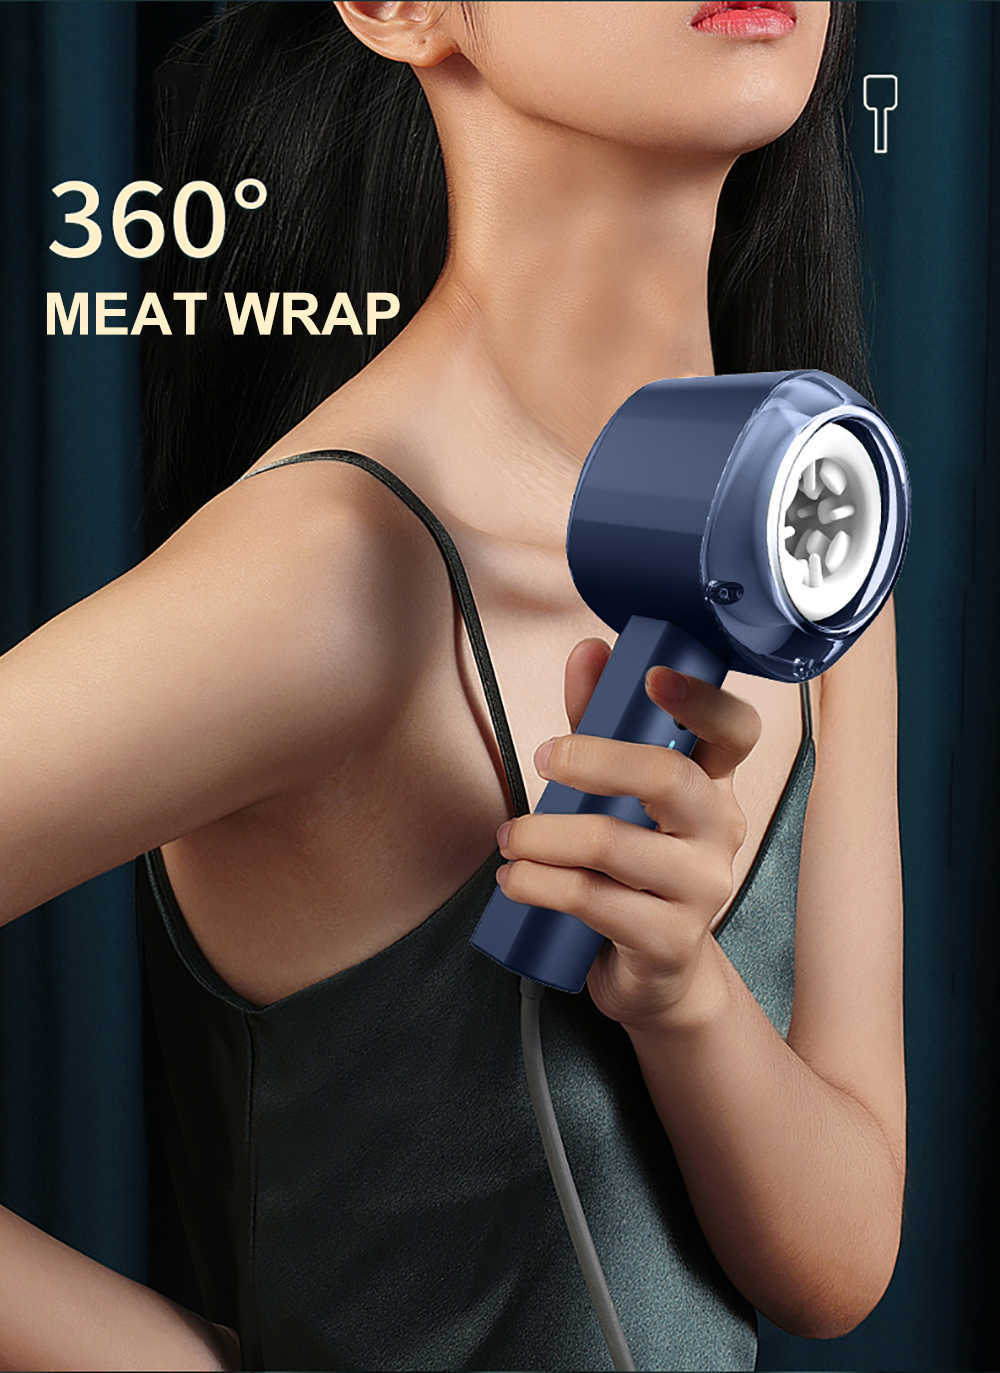 Beauty Items Automatic HandsFree Male Masturbaters Telescopic Cup Stroker sexy Toys For MenMale Masturbator Masturbation Massager